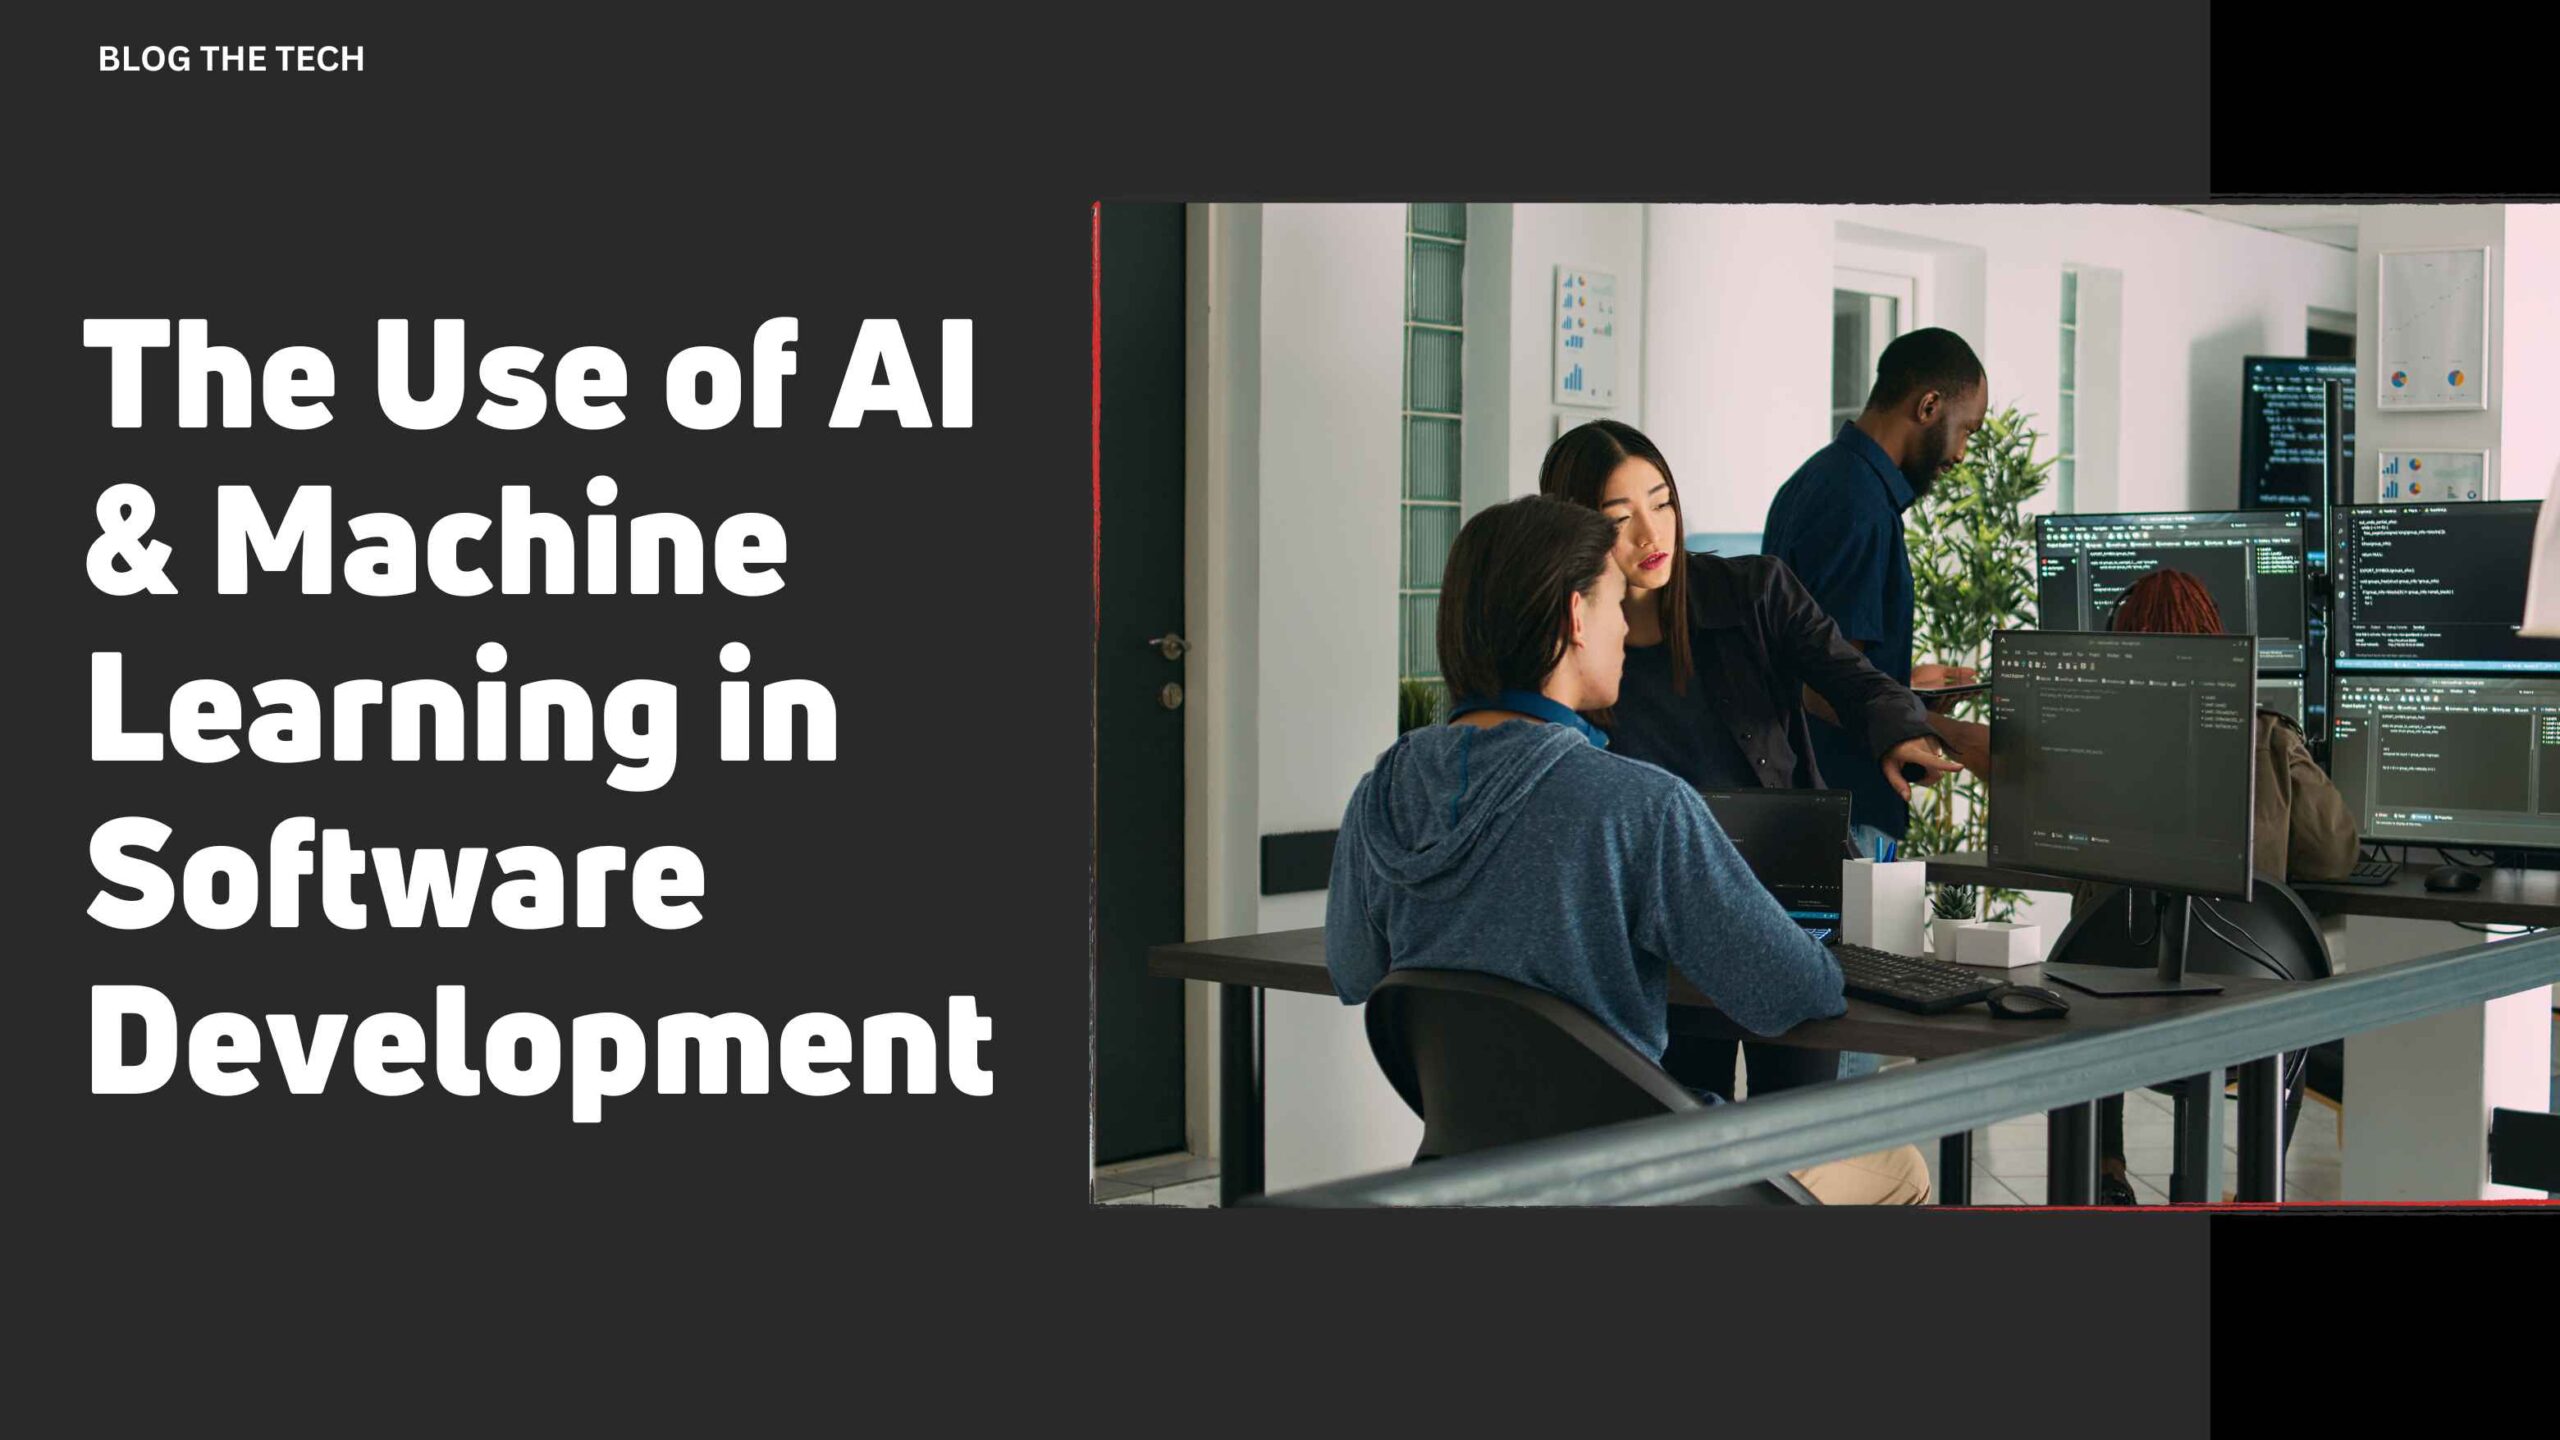 The Use of AI & Machine Learning in Software Development